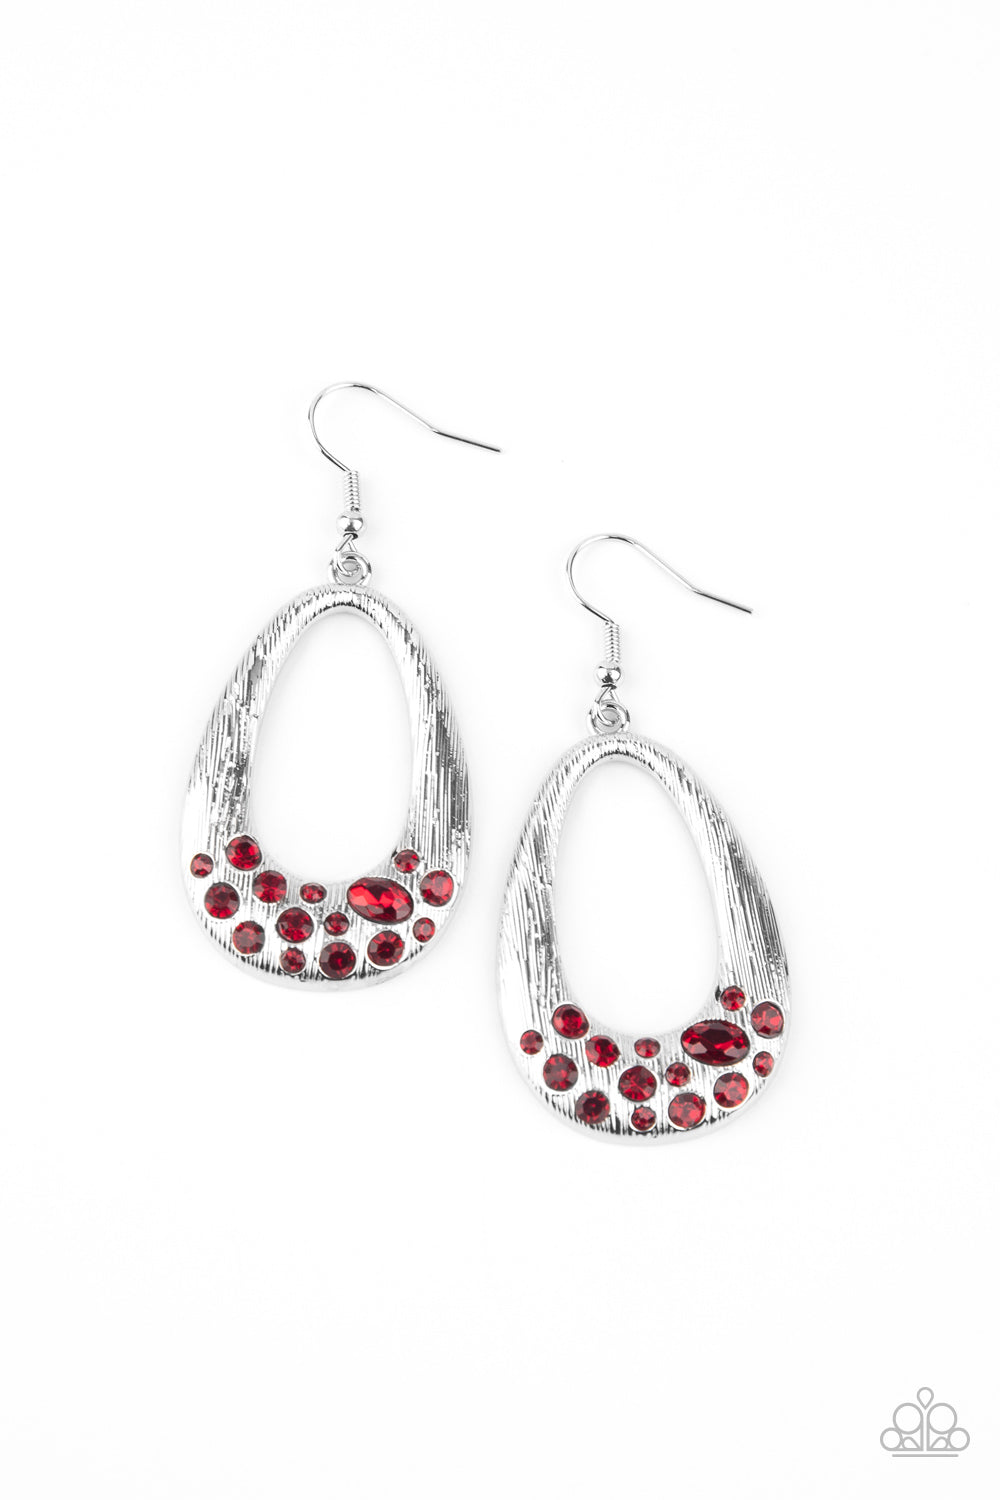 Paparazzi Accessories - Better LUXE Next Time - Red Earrings - Alies Bling Bar